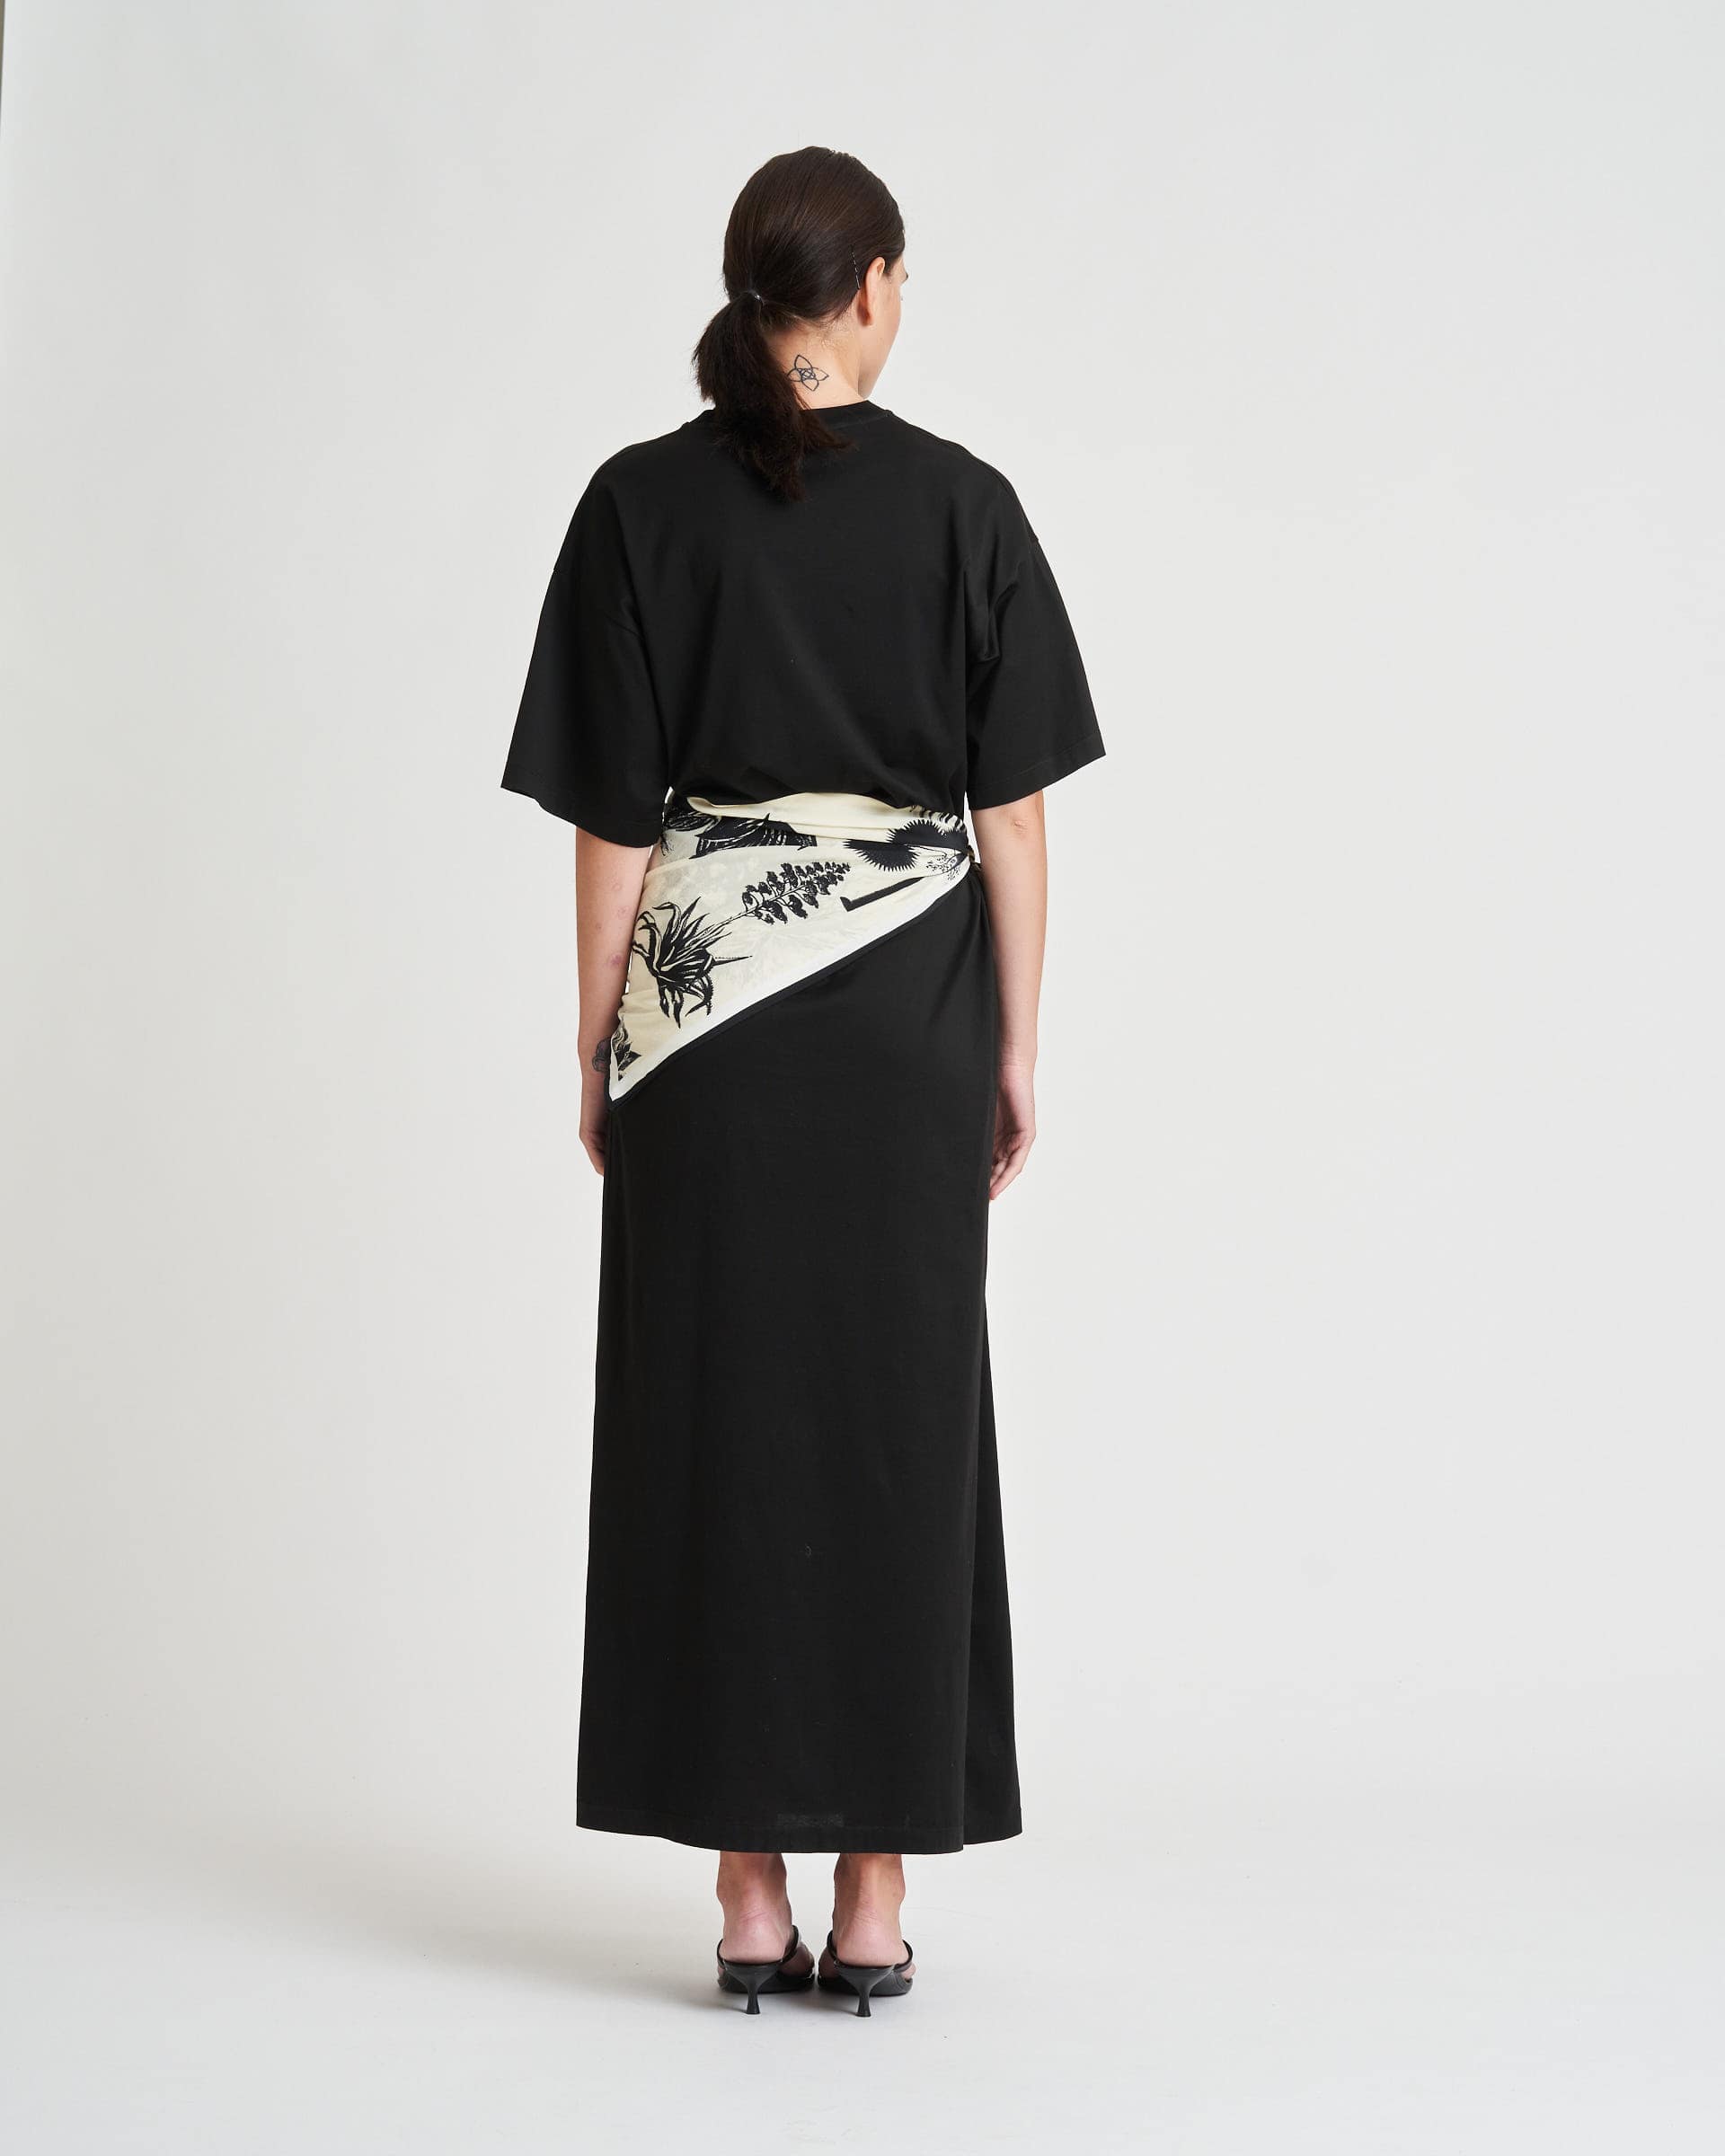 The Market Store | Jersey Dress With Foulard